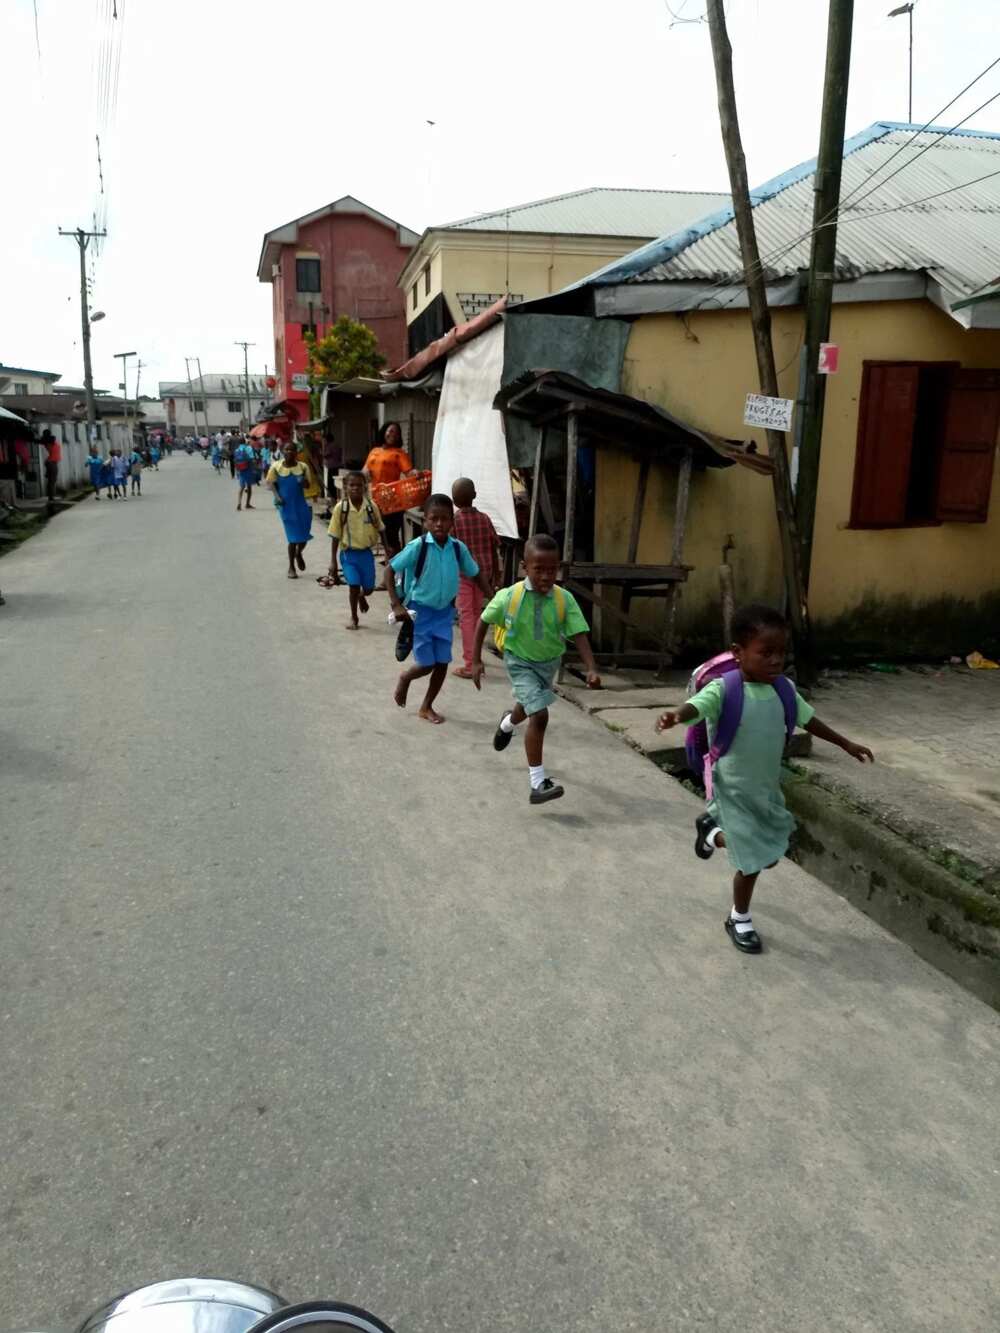 Pupils running home over fresh army vaccination in Rivers state. Photo credit: Anthony D. Penman